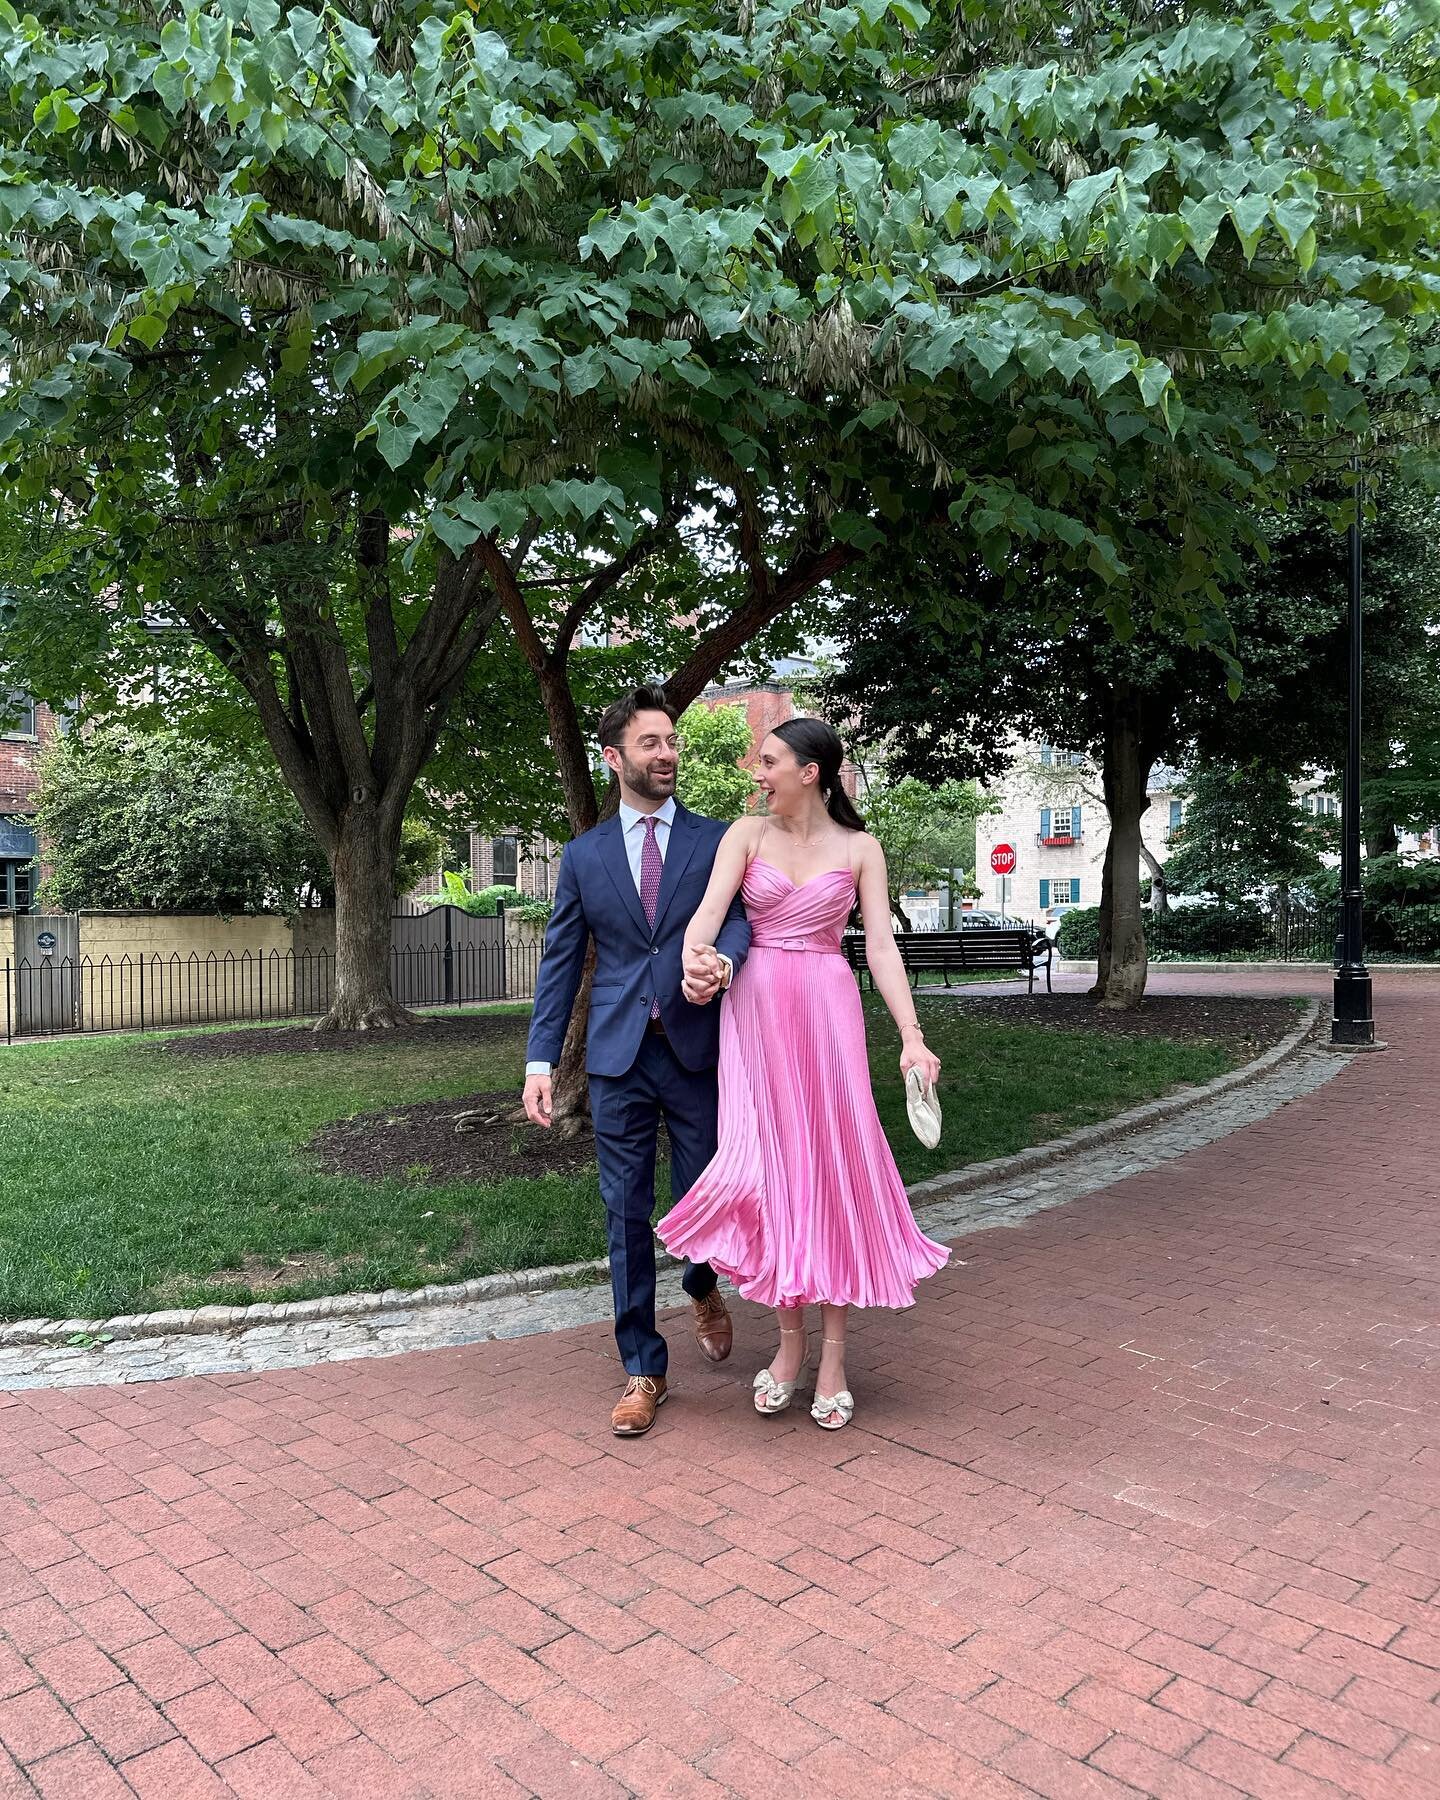 I always wear evening attire on my walks&hellip; don&rsquo;t you? 

Many congrats to Katherine and Eric for their stunning wedding!!